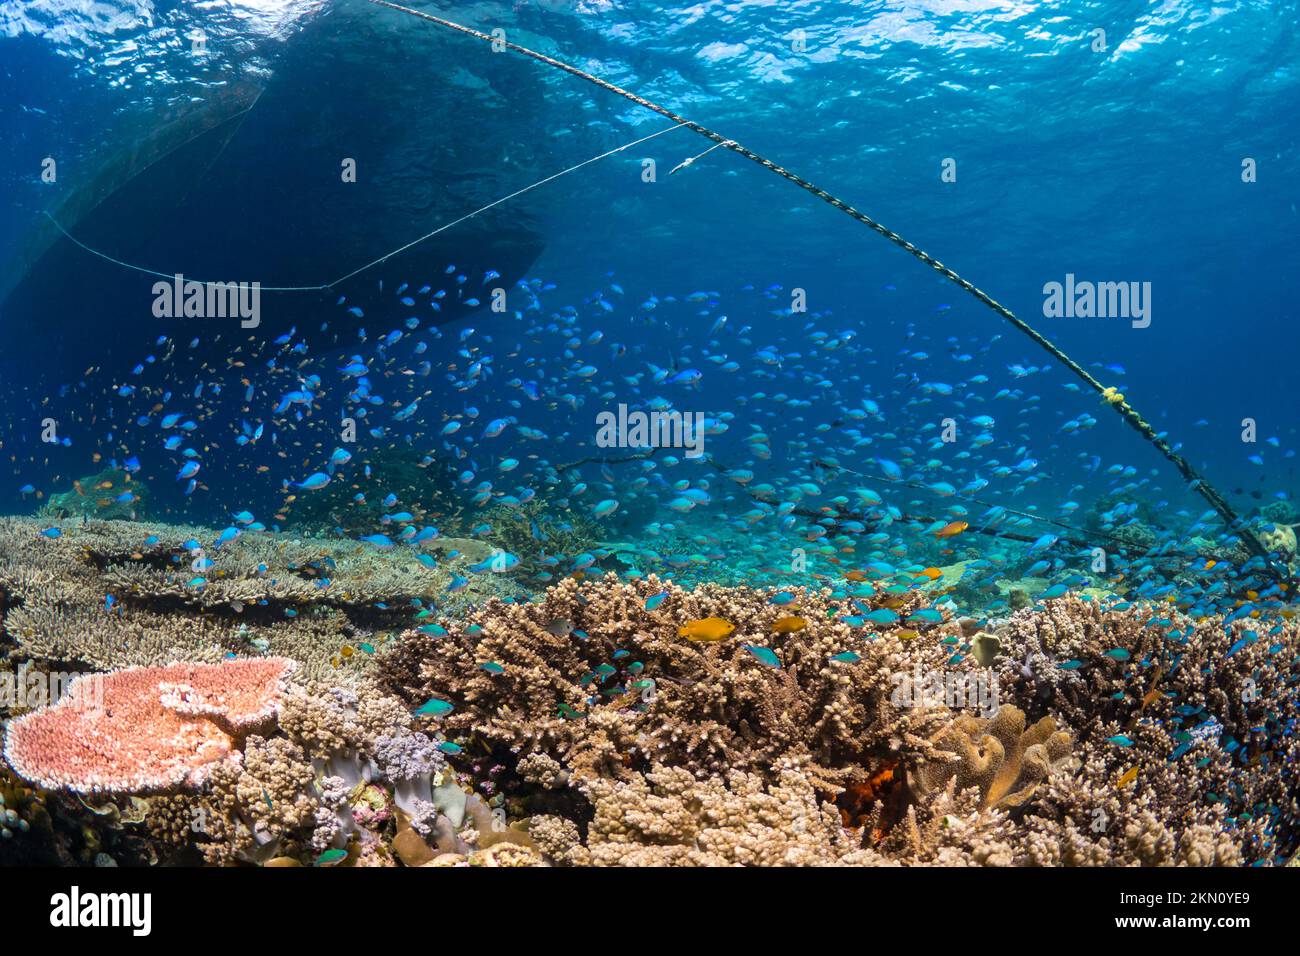 Ultimate biodiversity of the Indo pacific with schooling tropical fish above healthy abundant coral reef ecosystem. Stock Photo